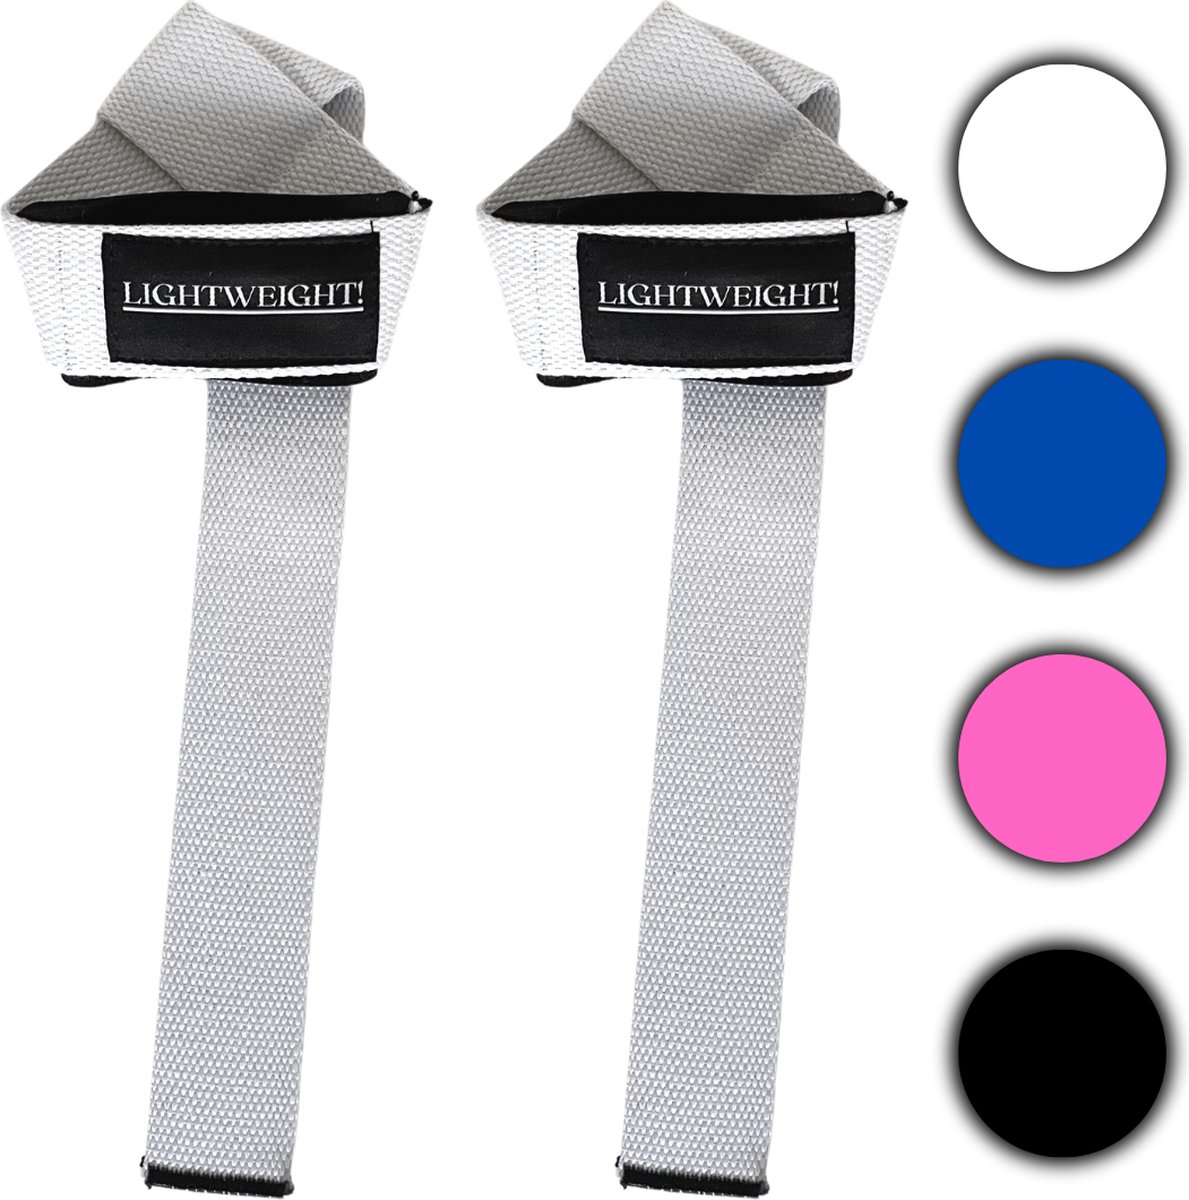 LIGHTWEIGHT! Lifting Straps - Wrist Straps - Deadlift Straps - Wit - Krachttraining Accessoires - Lifting Grips - Powerlifting - Bodybuilding - Gym Straps - Fitness - Set - Incl Padding